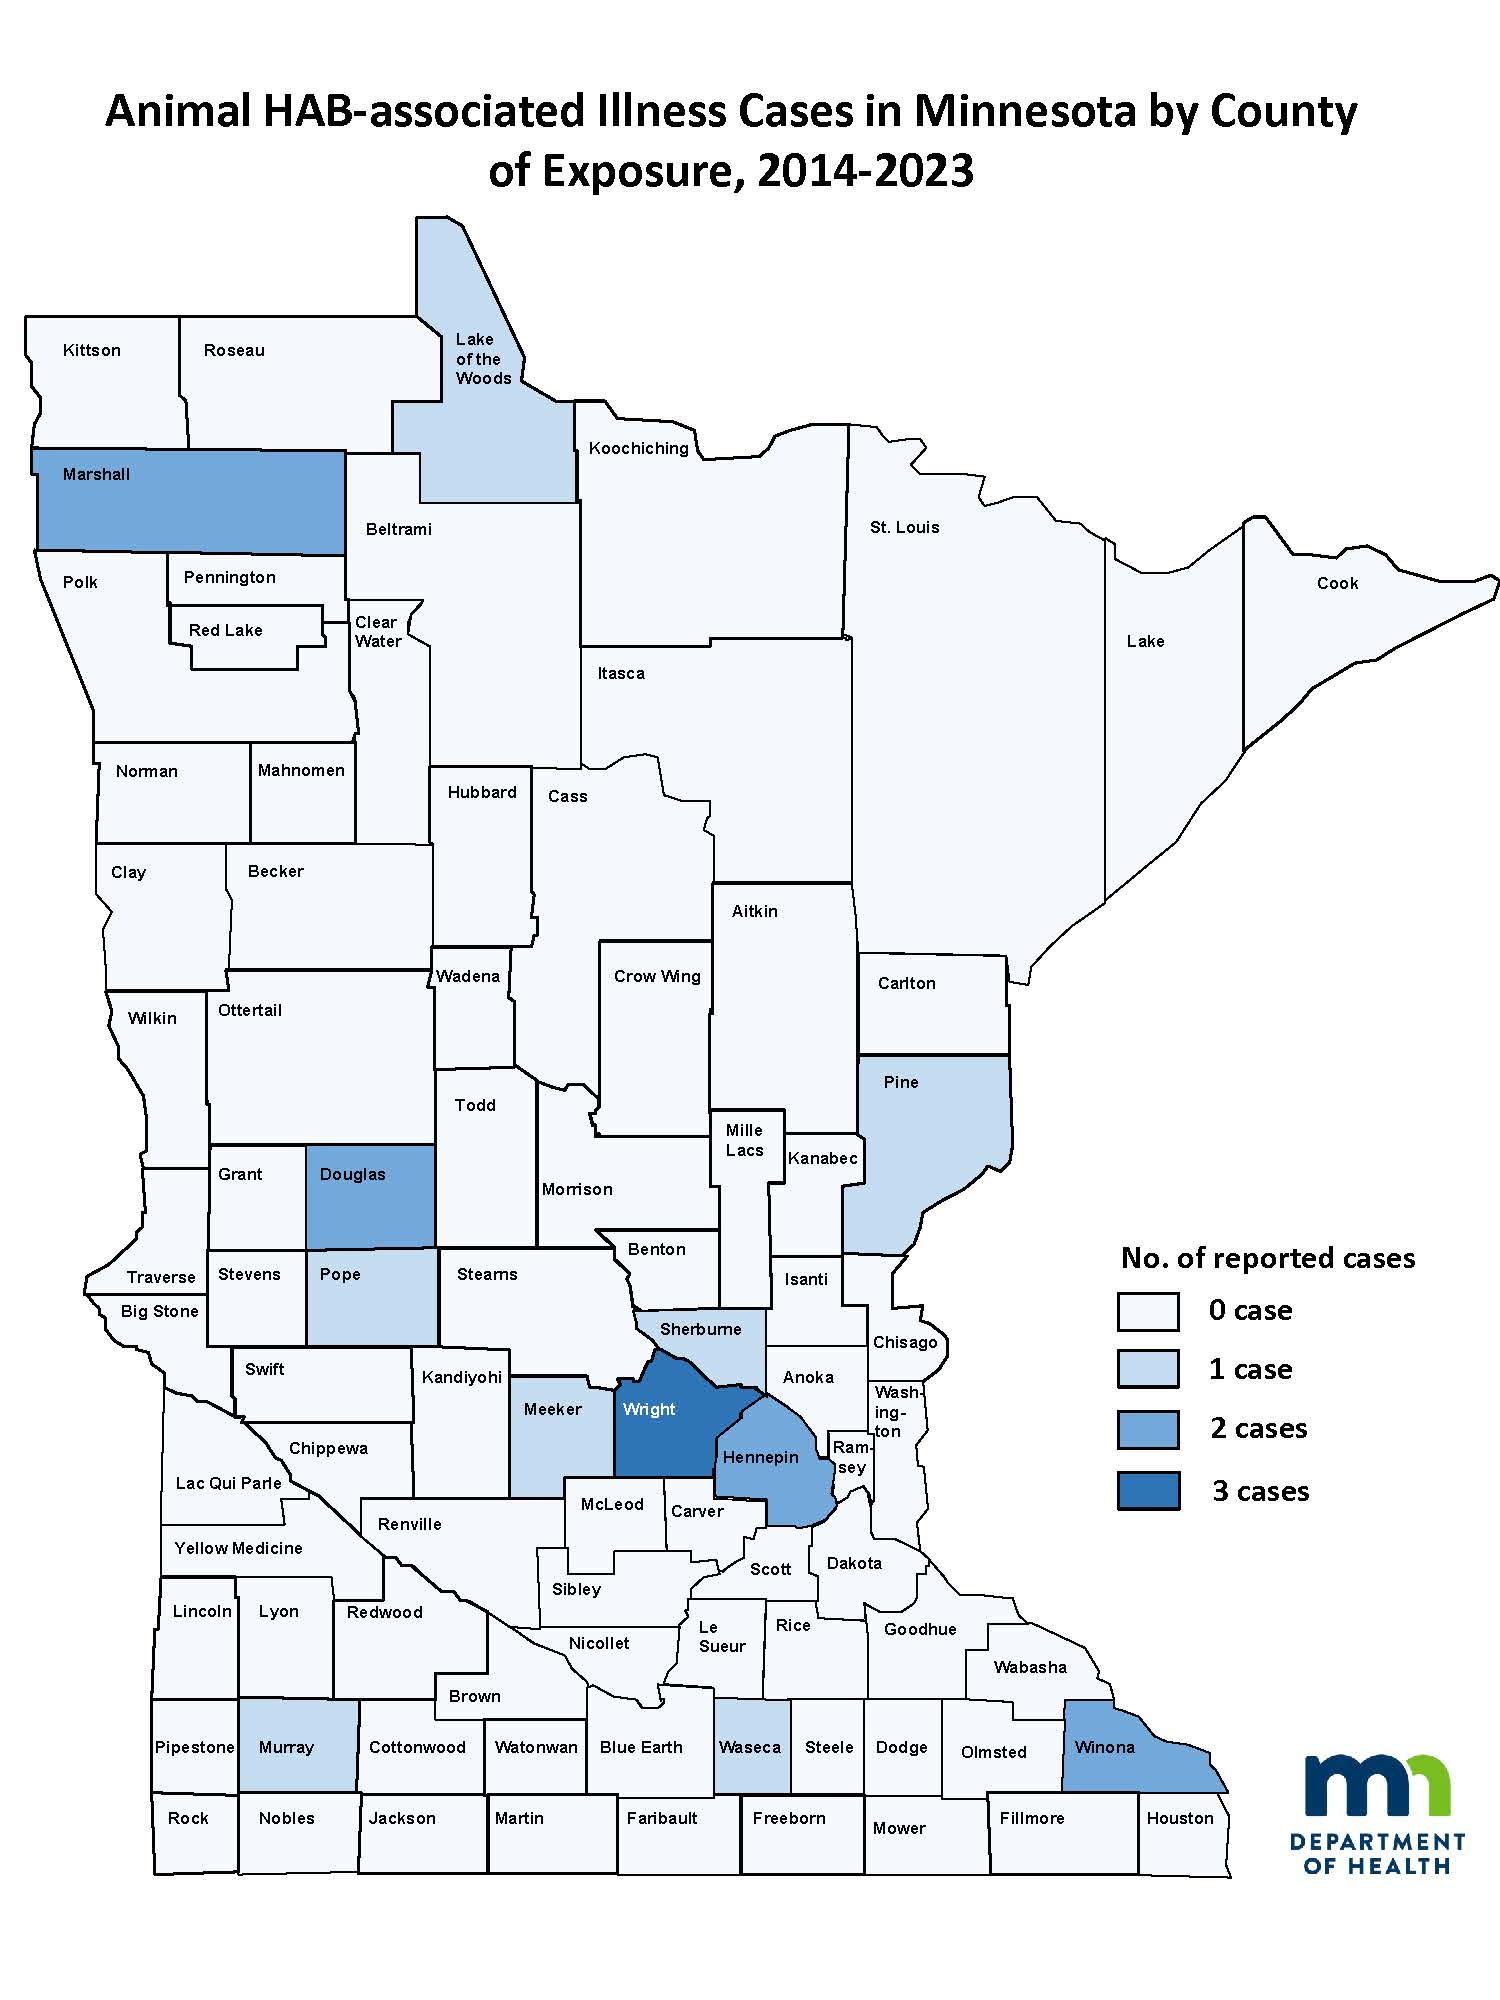 Animal HAB-Associated Illness Cases in Minnesota by County of Exposure, 2014-2022